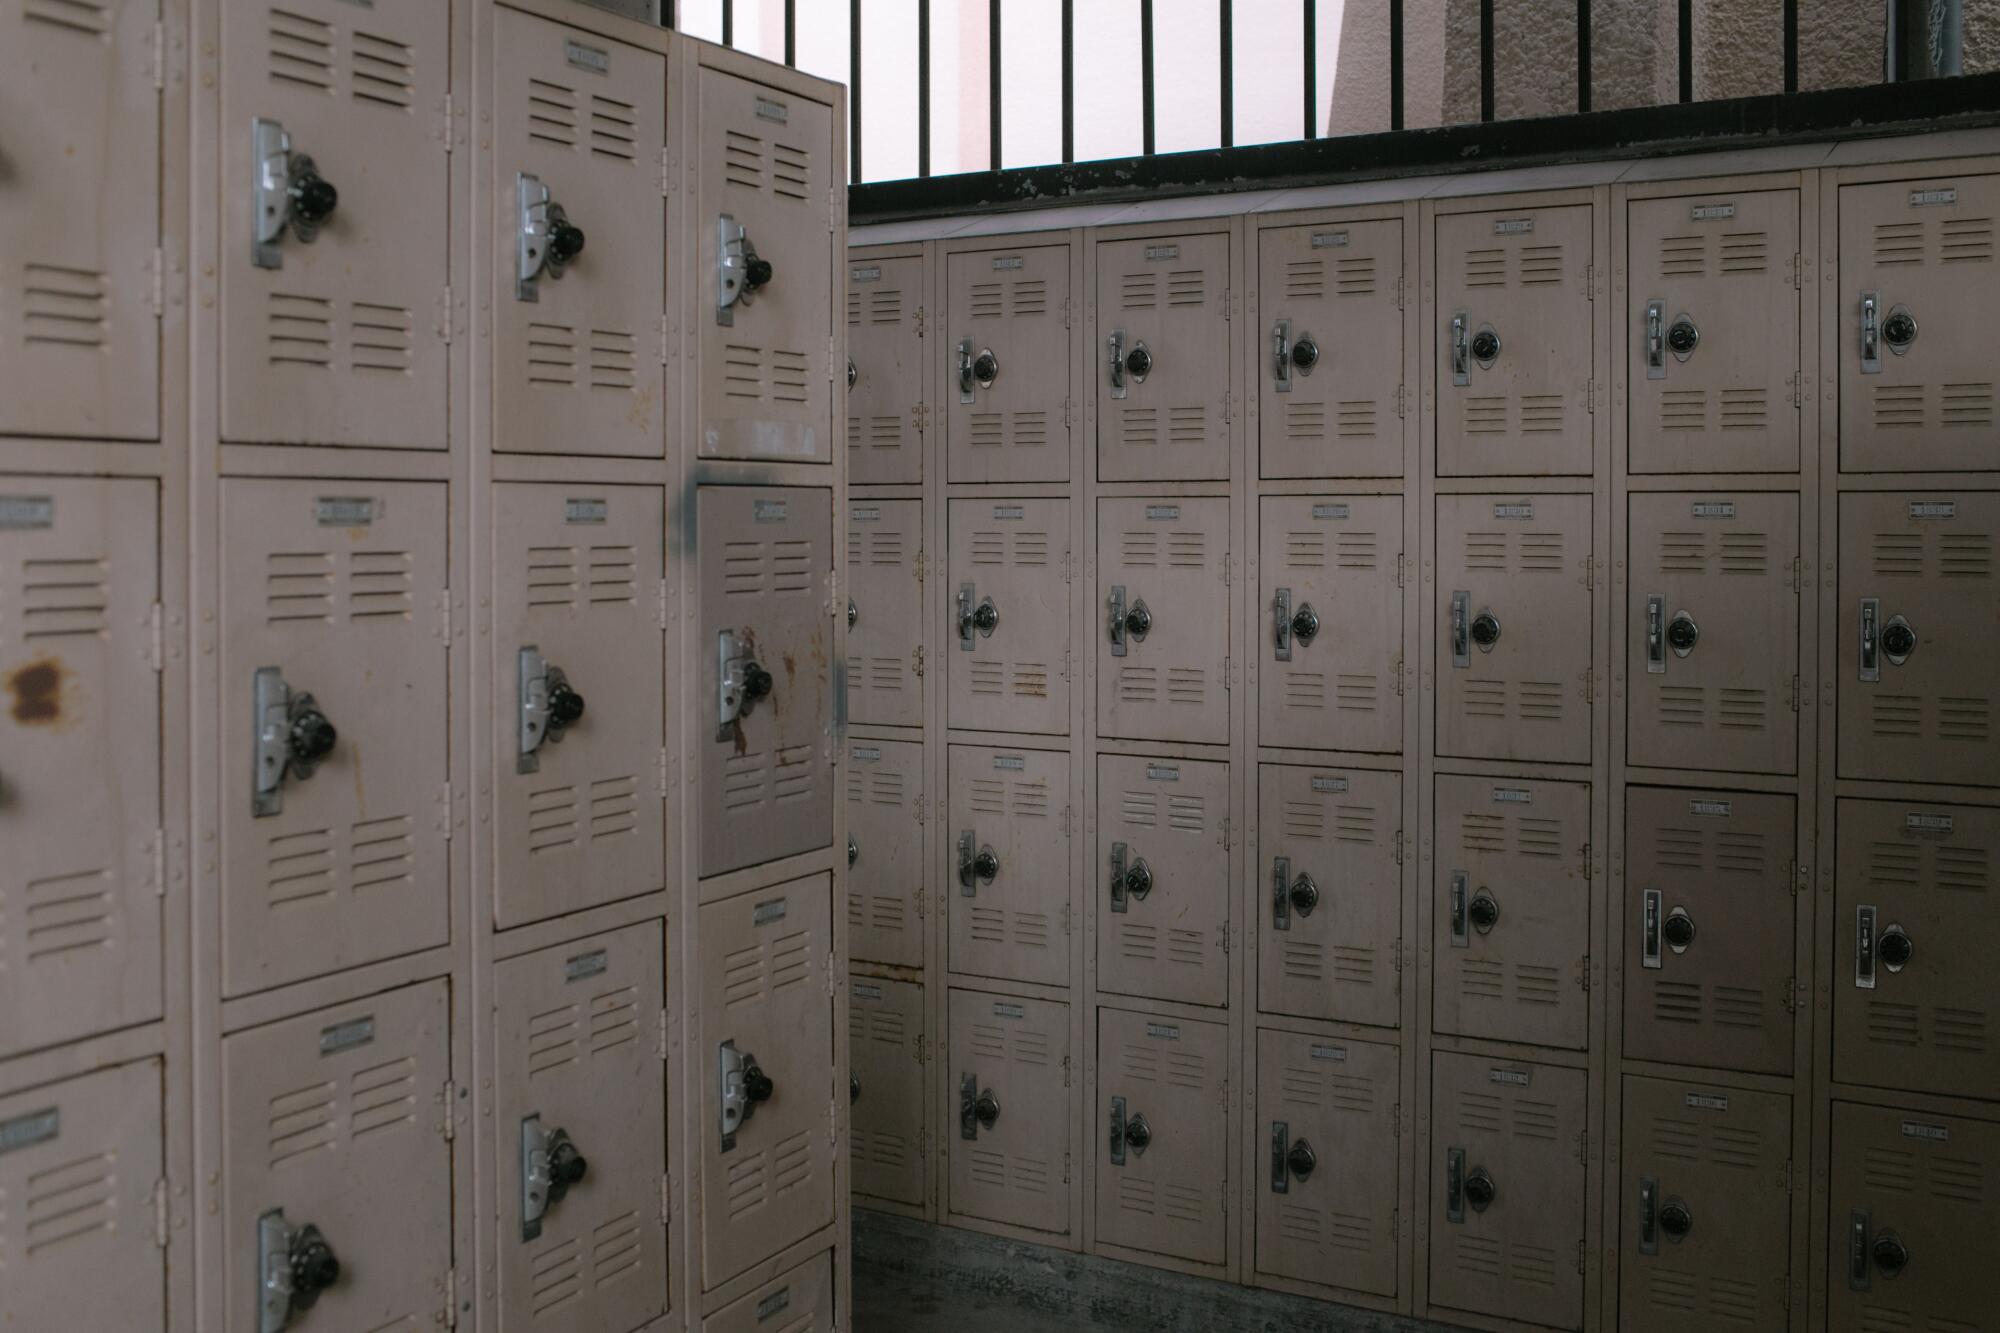 Rows of pale, dimly lit lockers with combination locks.